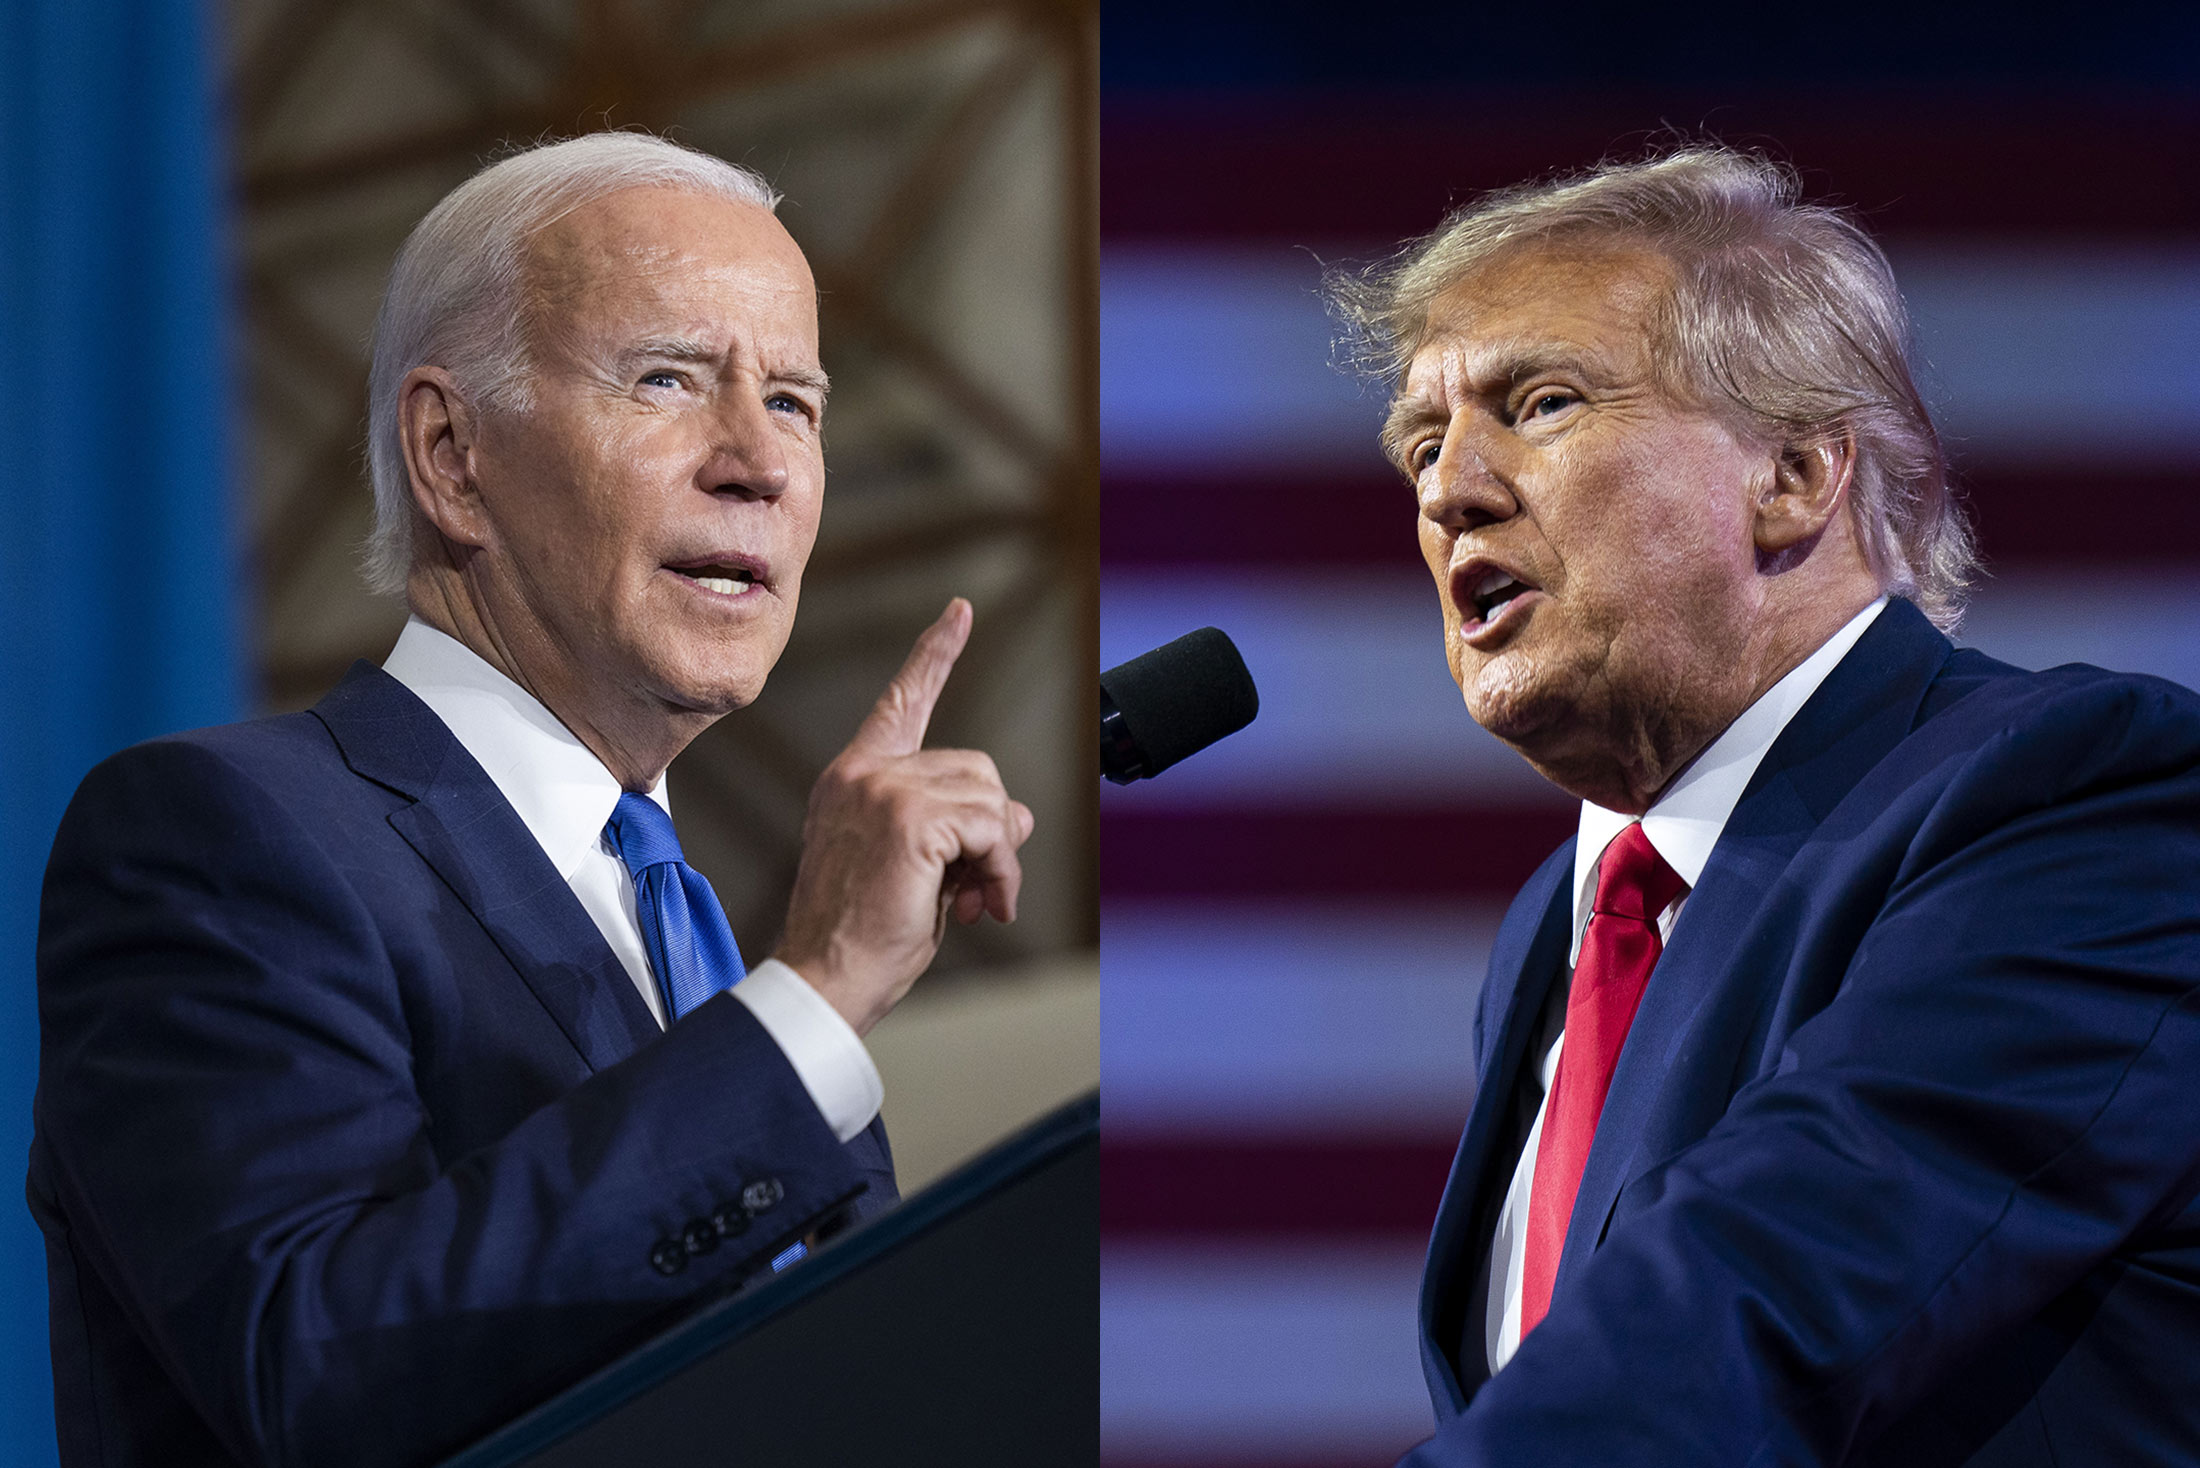 Will Trump or Biden's promises win? American analyst Explains